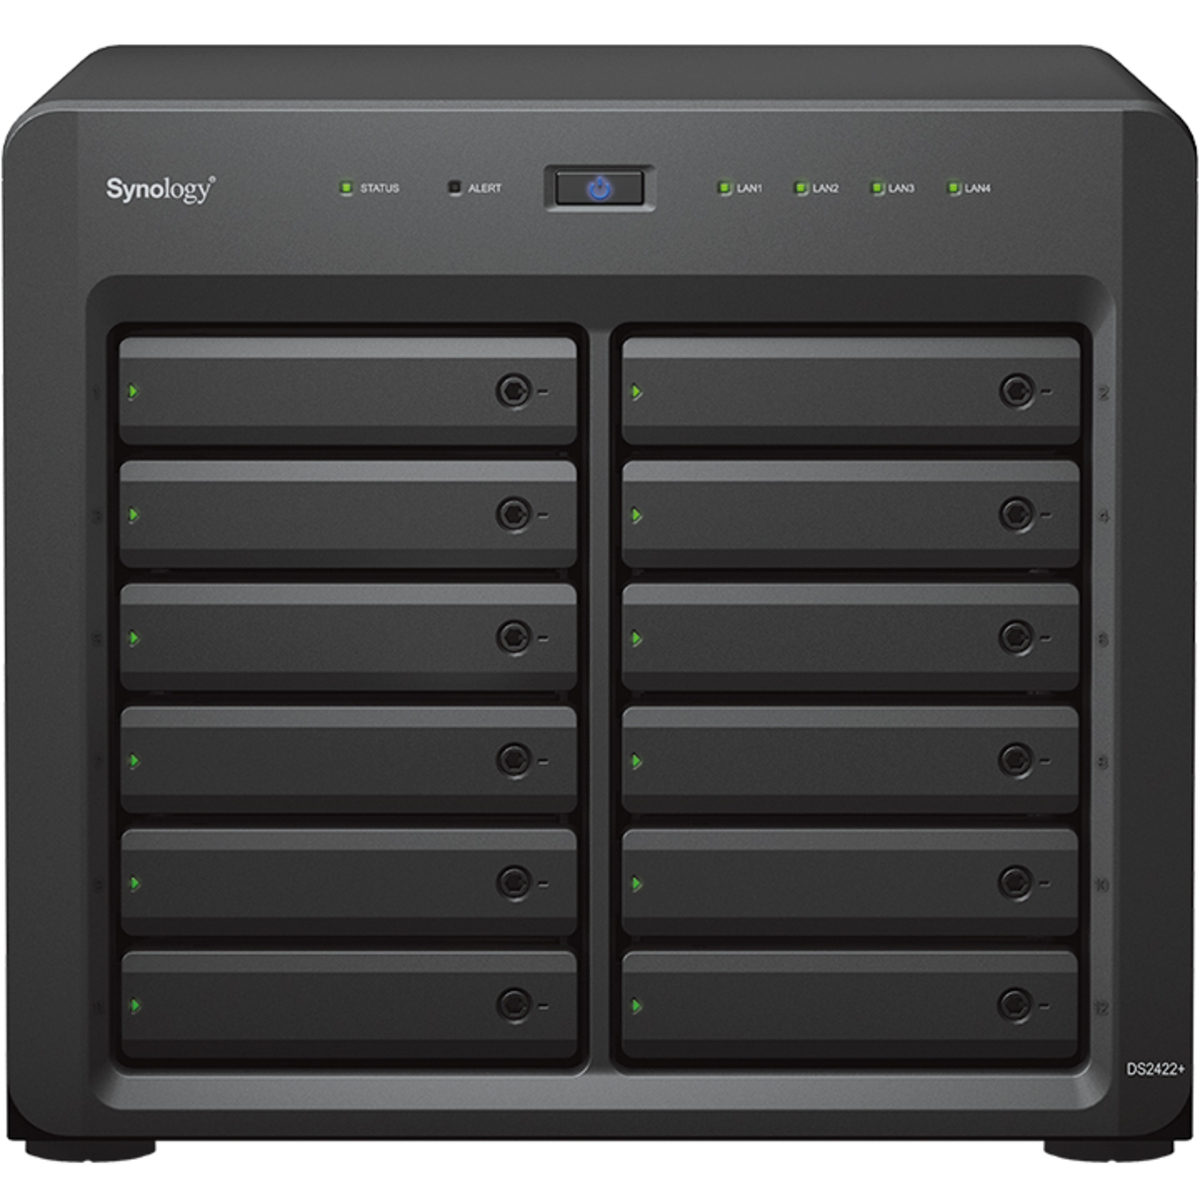 Synology DiskStation DS2422+ 16tb 12-Bay Desktop Multimedia / Power User / Business NAS - Network Attached Storage Device 8x2tb Sandisk Ultra 3D SDSSDH3-2T00 2.5 560/520MB/s SATA 6Gb/s SSD CONSUMER Class Drives Installed - Burn-In Tested - FREE RAM UPGRADE DiskStation DS2422+